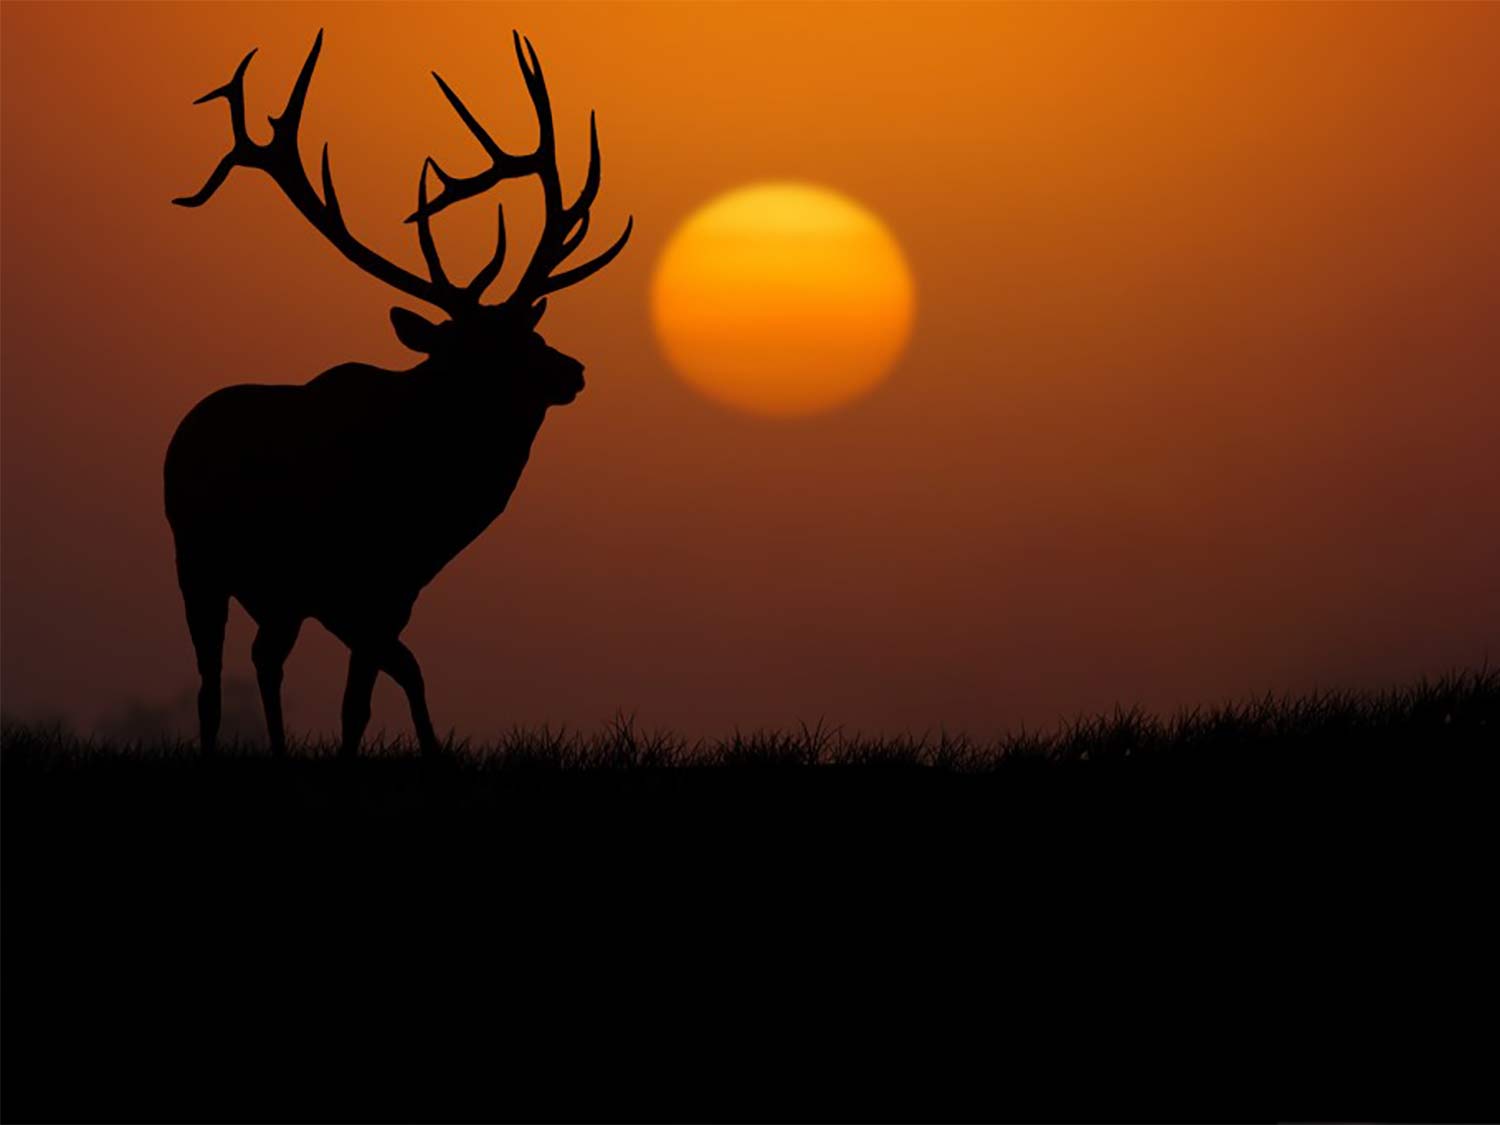 A silhouette of a large elk against a deep sunset with the sun on the horizon.